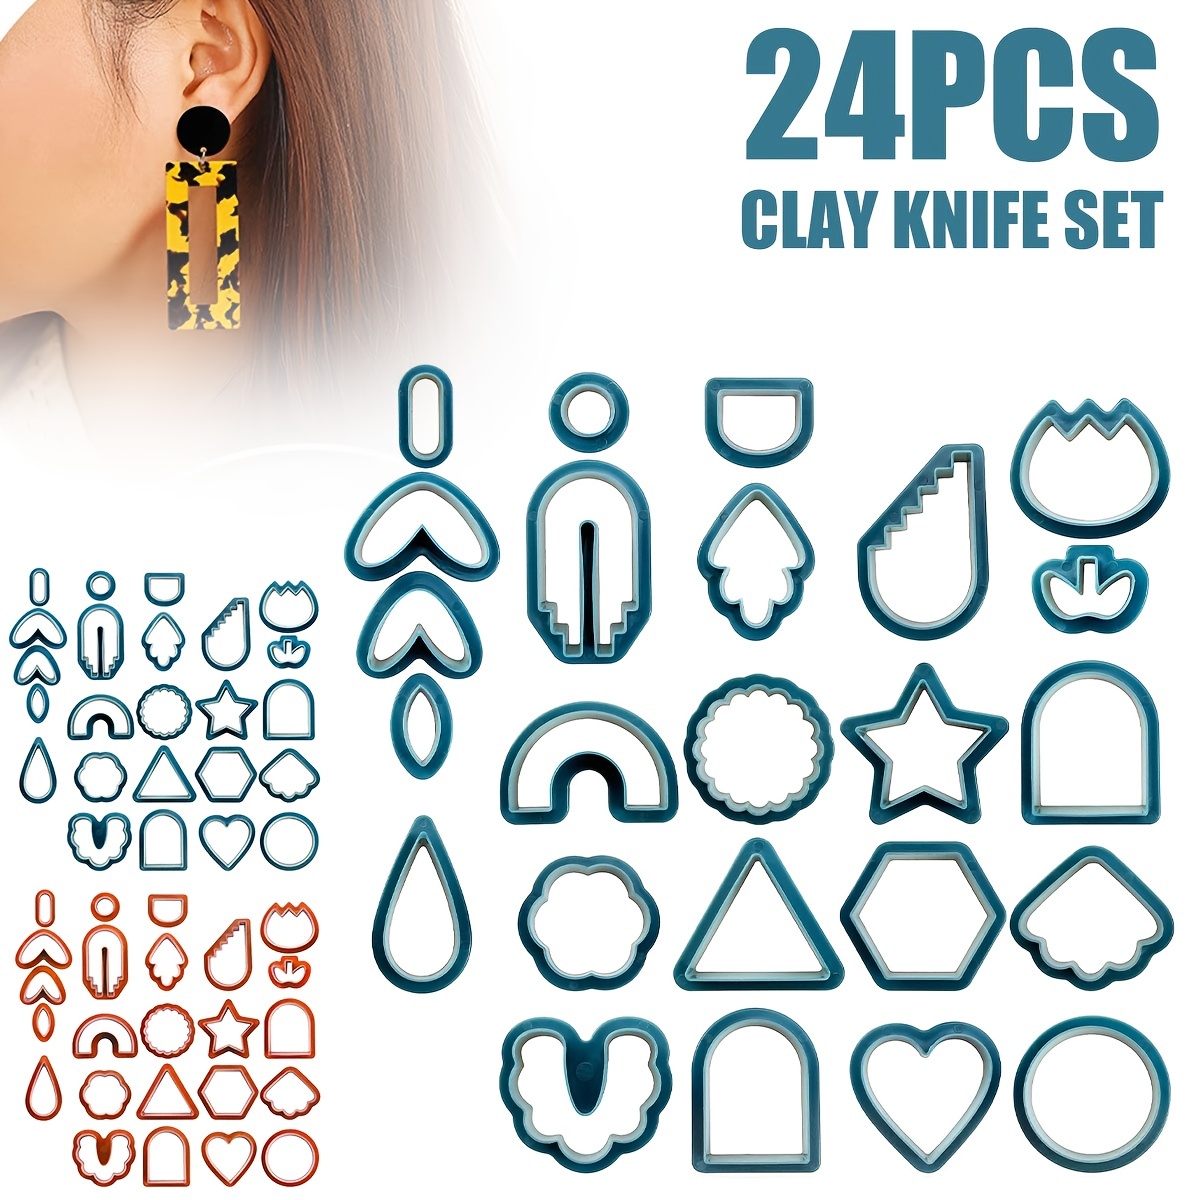 PTFJZ Polymer Clay Cutters for Earring Making - 160pcs Clay Tools Set with Earrings Accessories, 42+8pcs Different Shape Plastic Clay Molds Clay